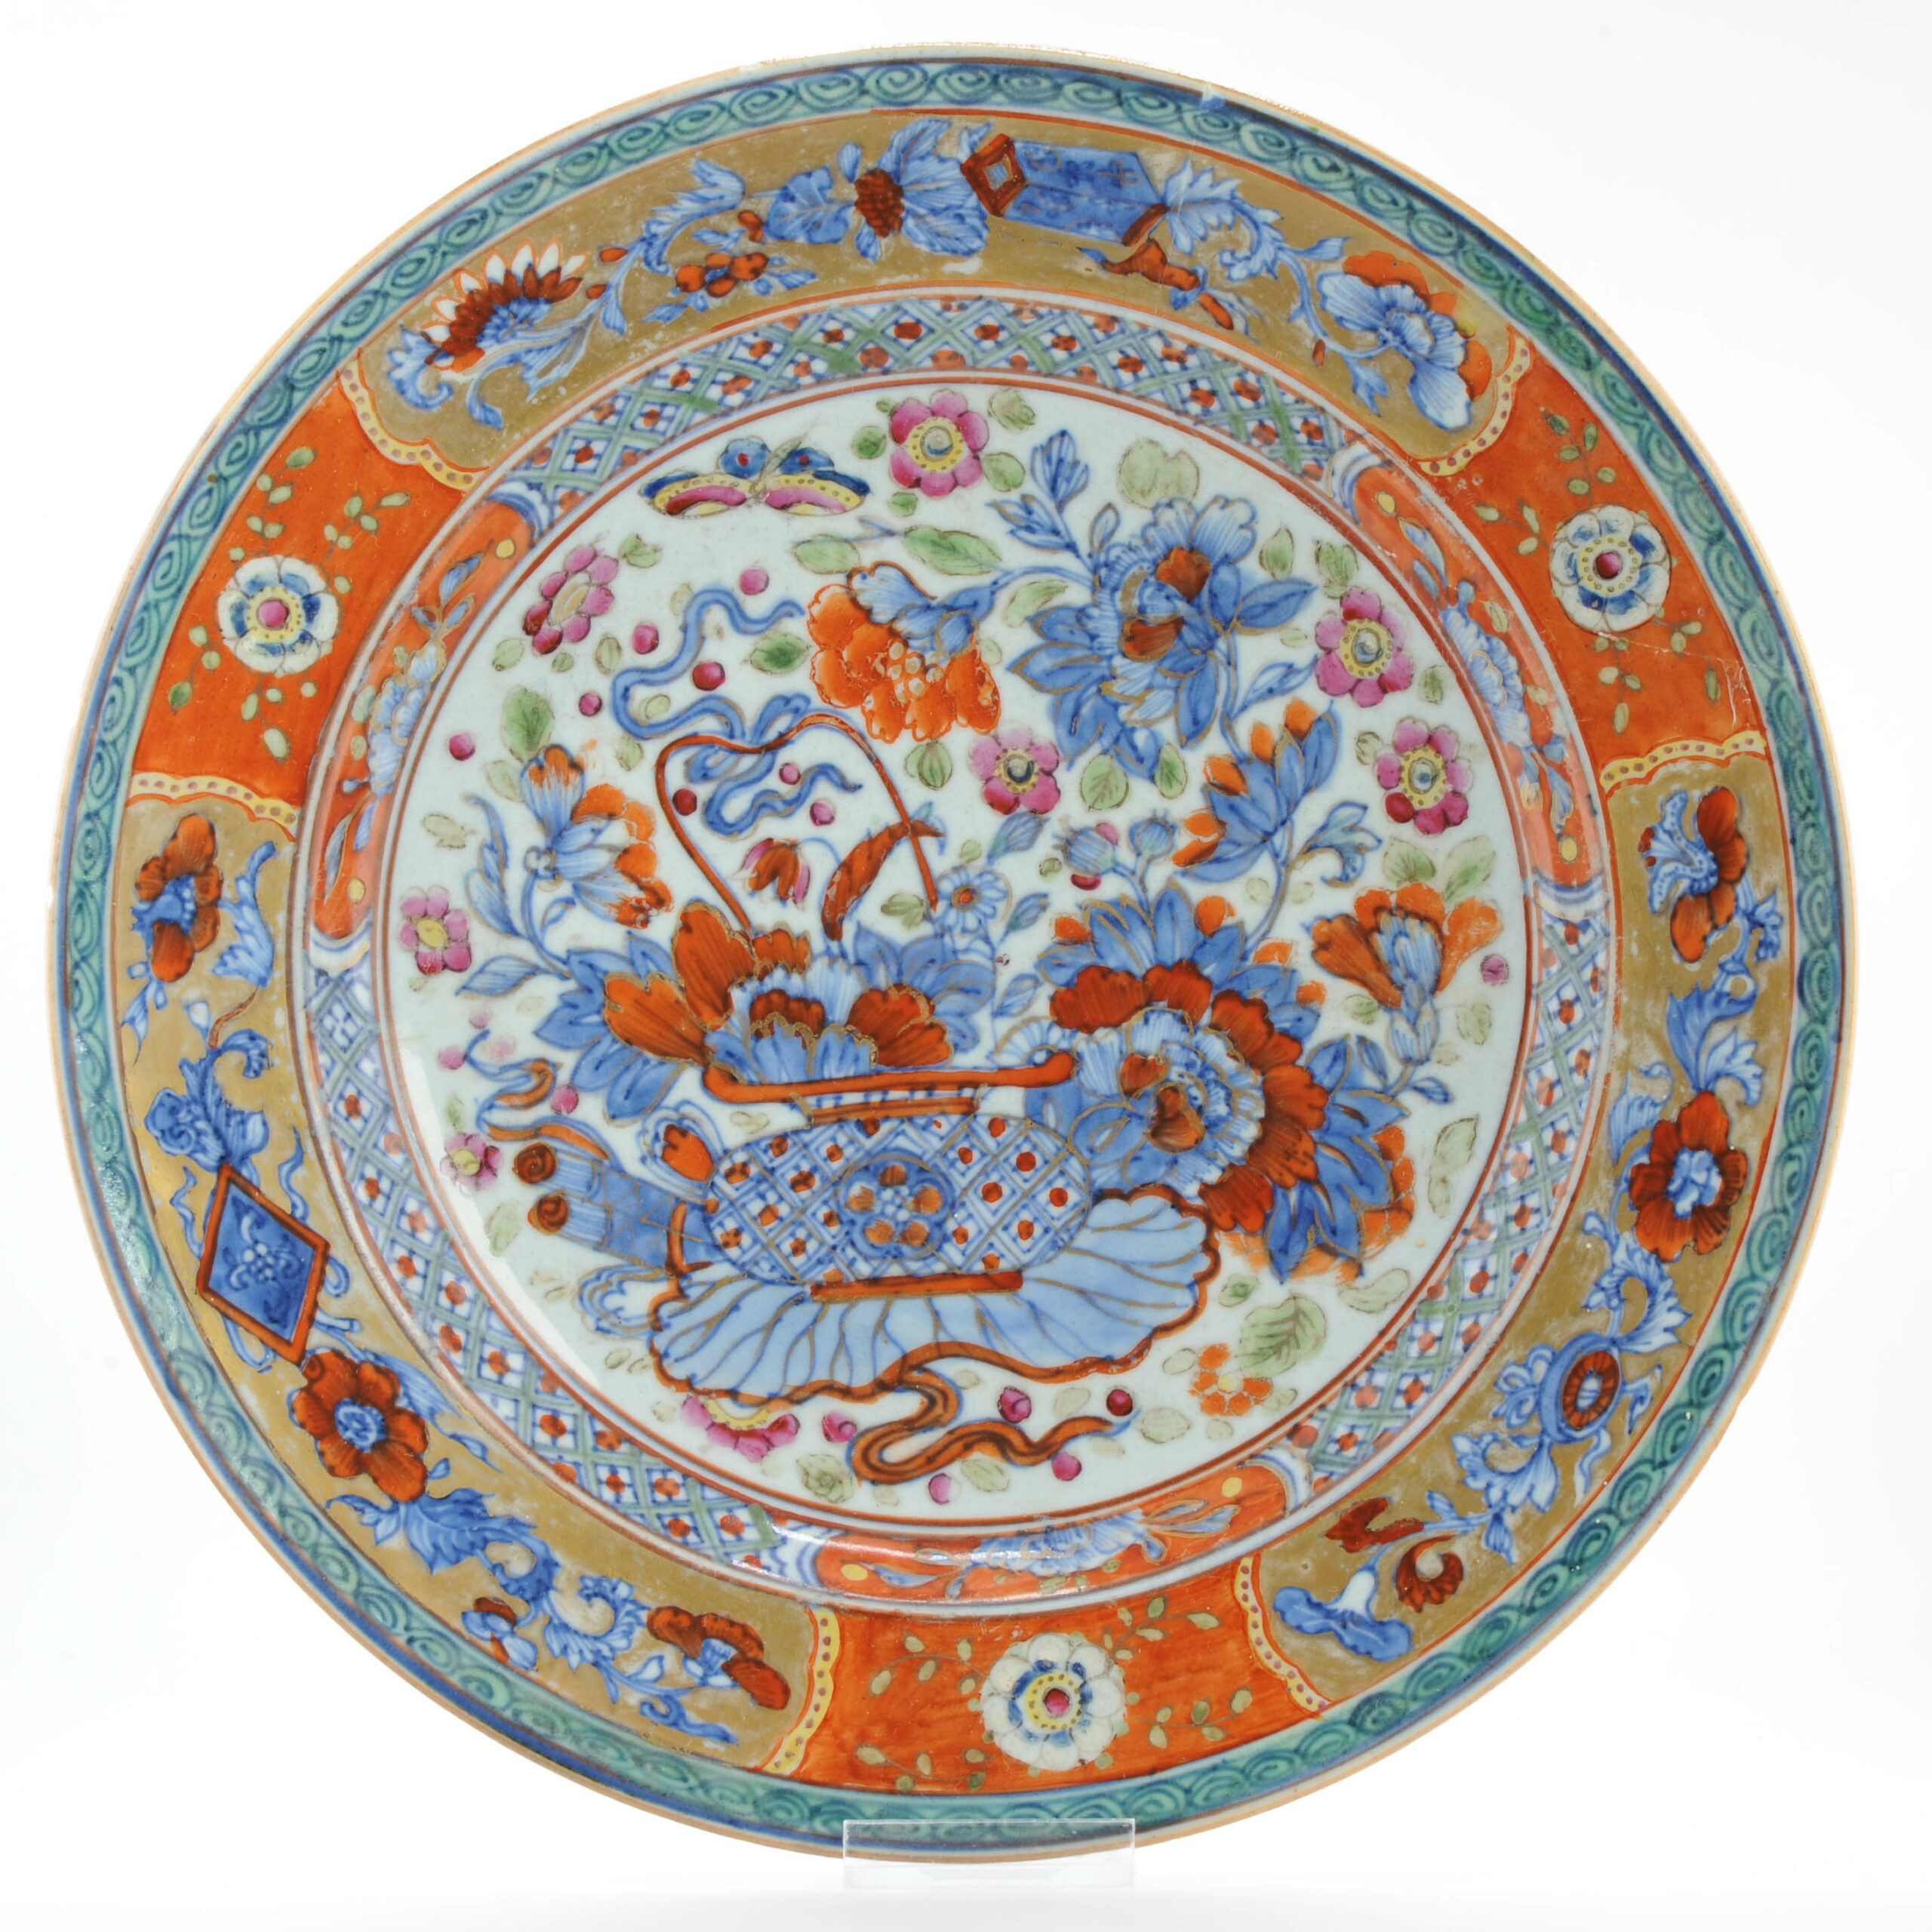 1349 Antique Chinese 1730-1740 Plate. Redecorated in the UK 1780-1820. Pseudo Marked